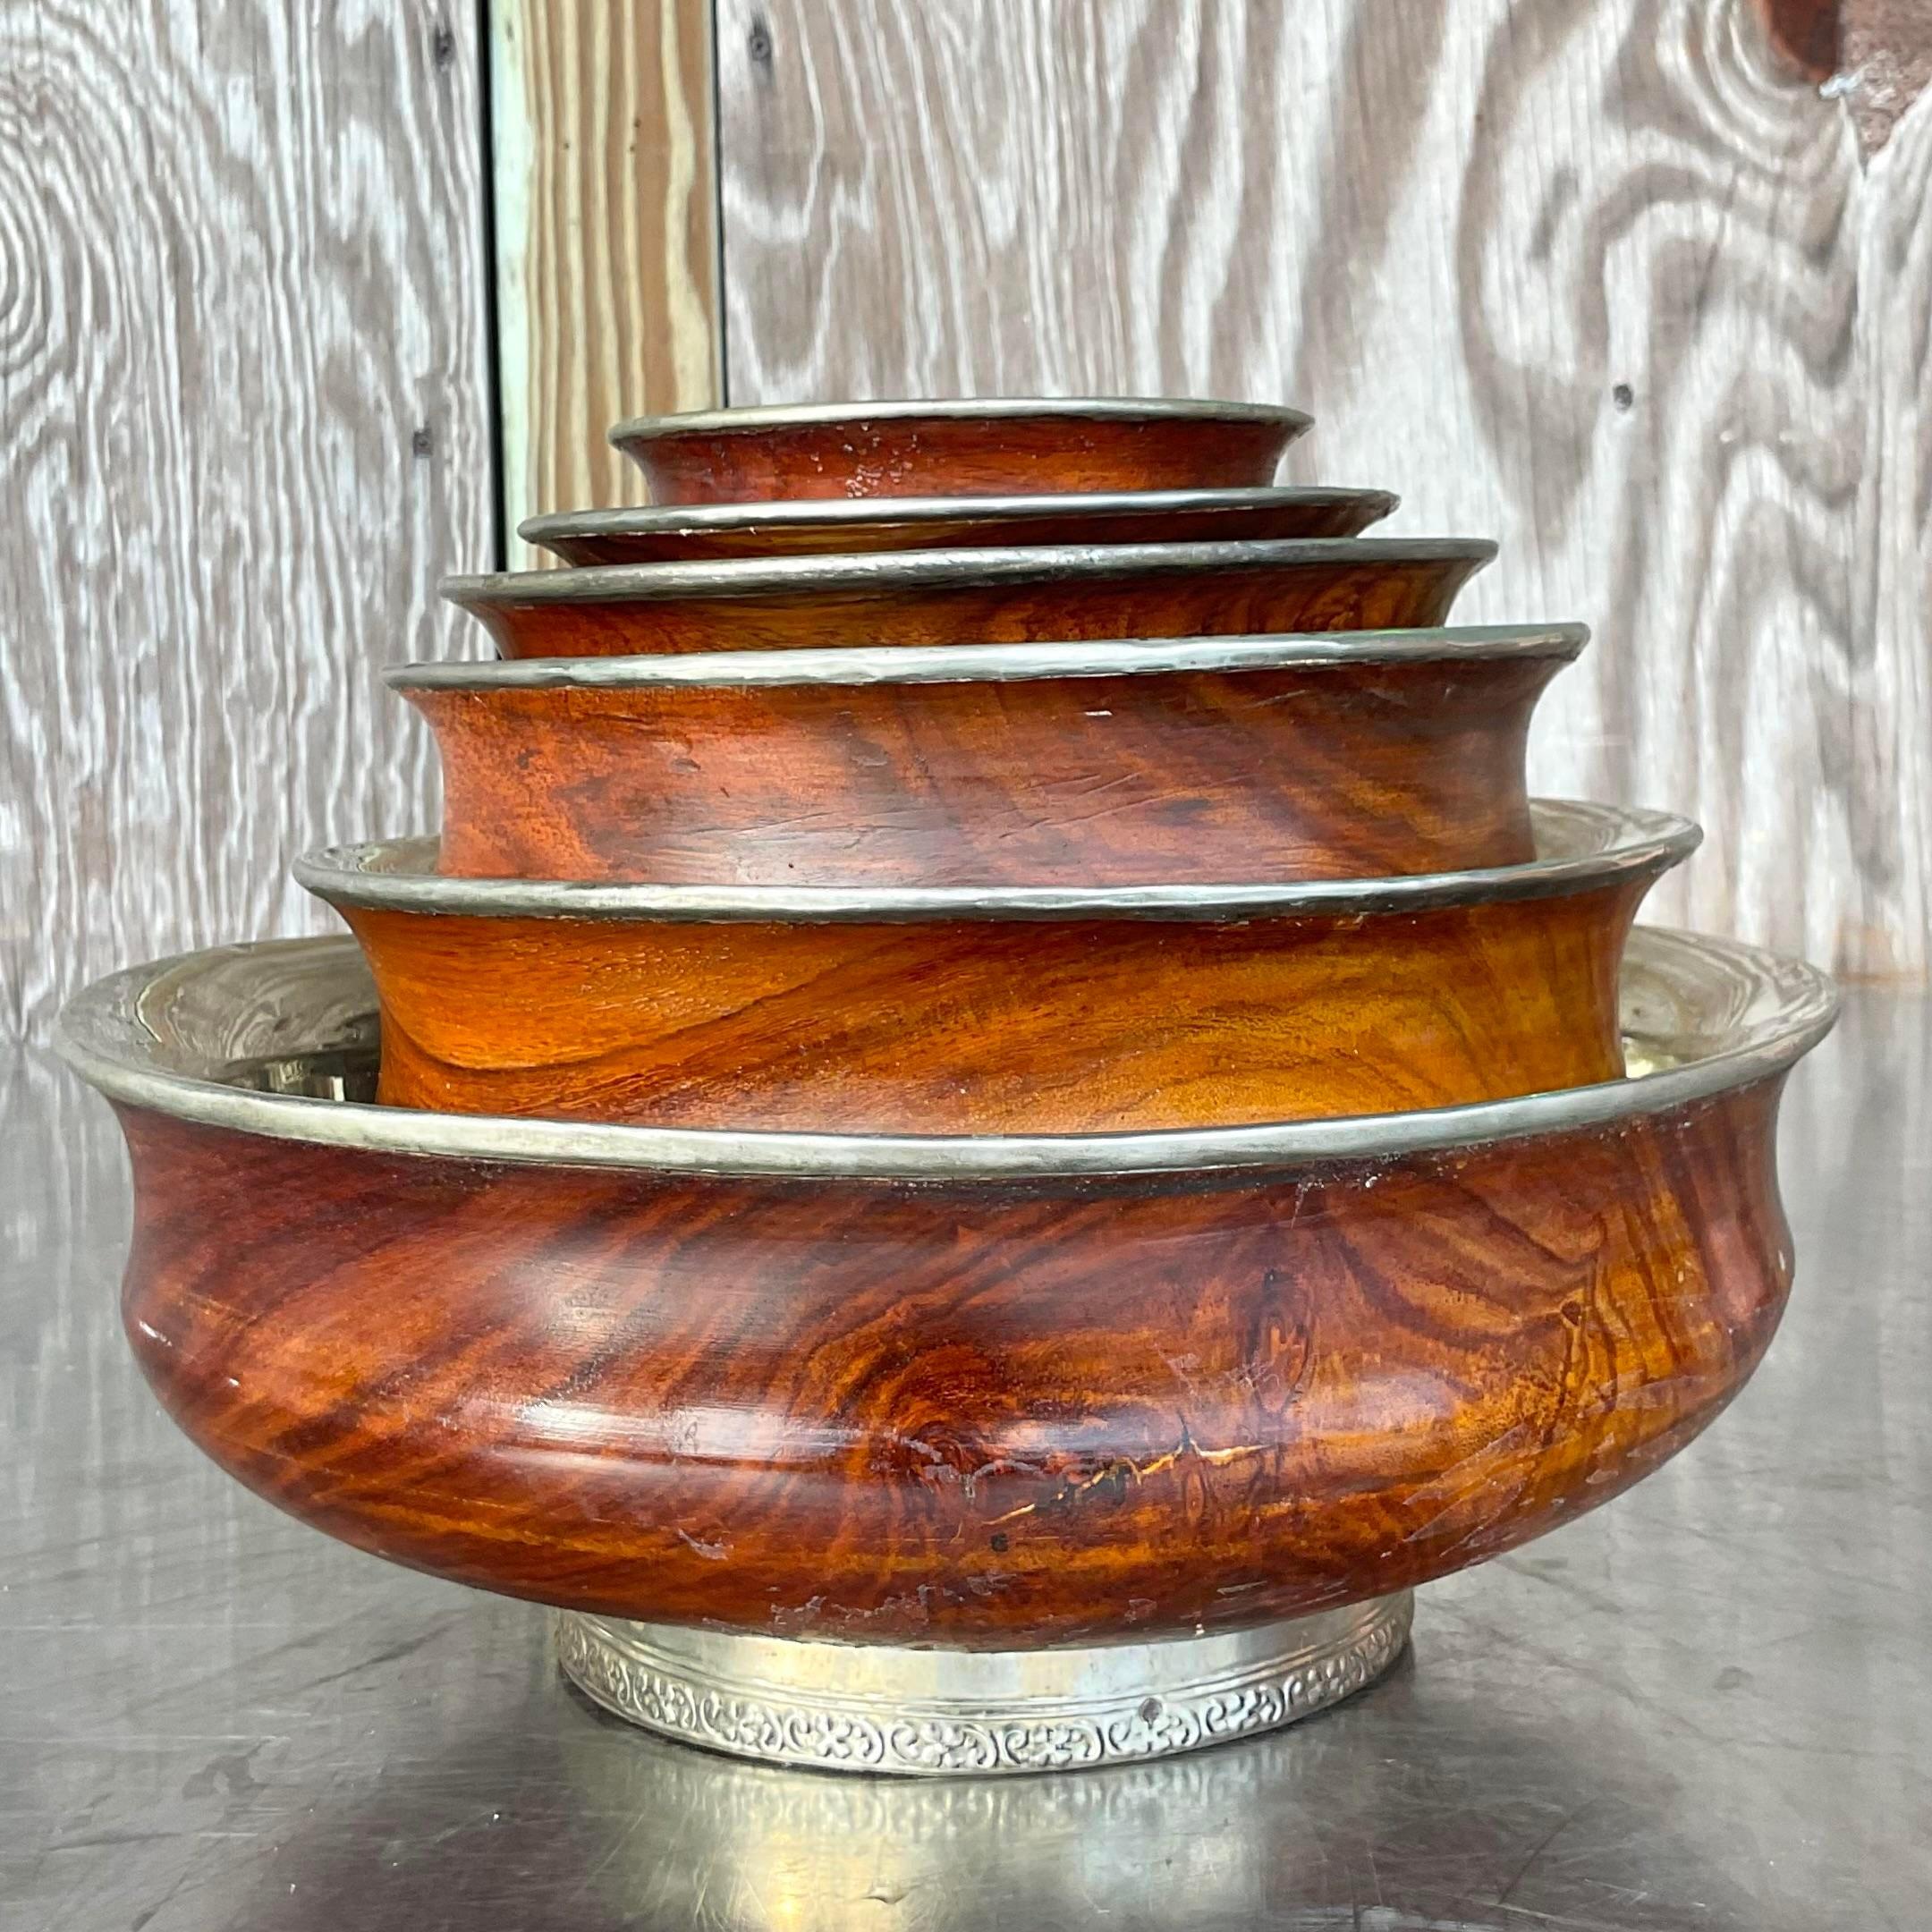 A stunning set of five vintage stacking bowls. A chic team bowl with a polished nickel interior. Acquired from a Palm Beach estate.
Bowl 1 - 7.75x7.75x3.25
Bowl 2 - 6.75x6.75x3
Bowl 3 - 6x6x2.25
Bowl 4 - 5x5x1.75
Bowl 5 - 4x4x1.75 